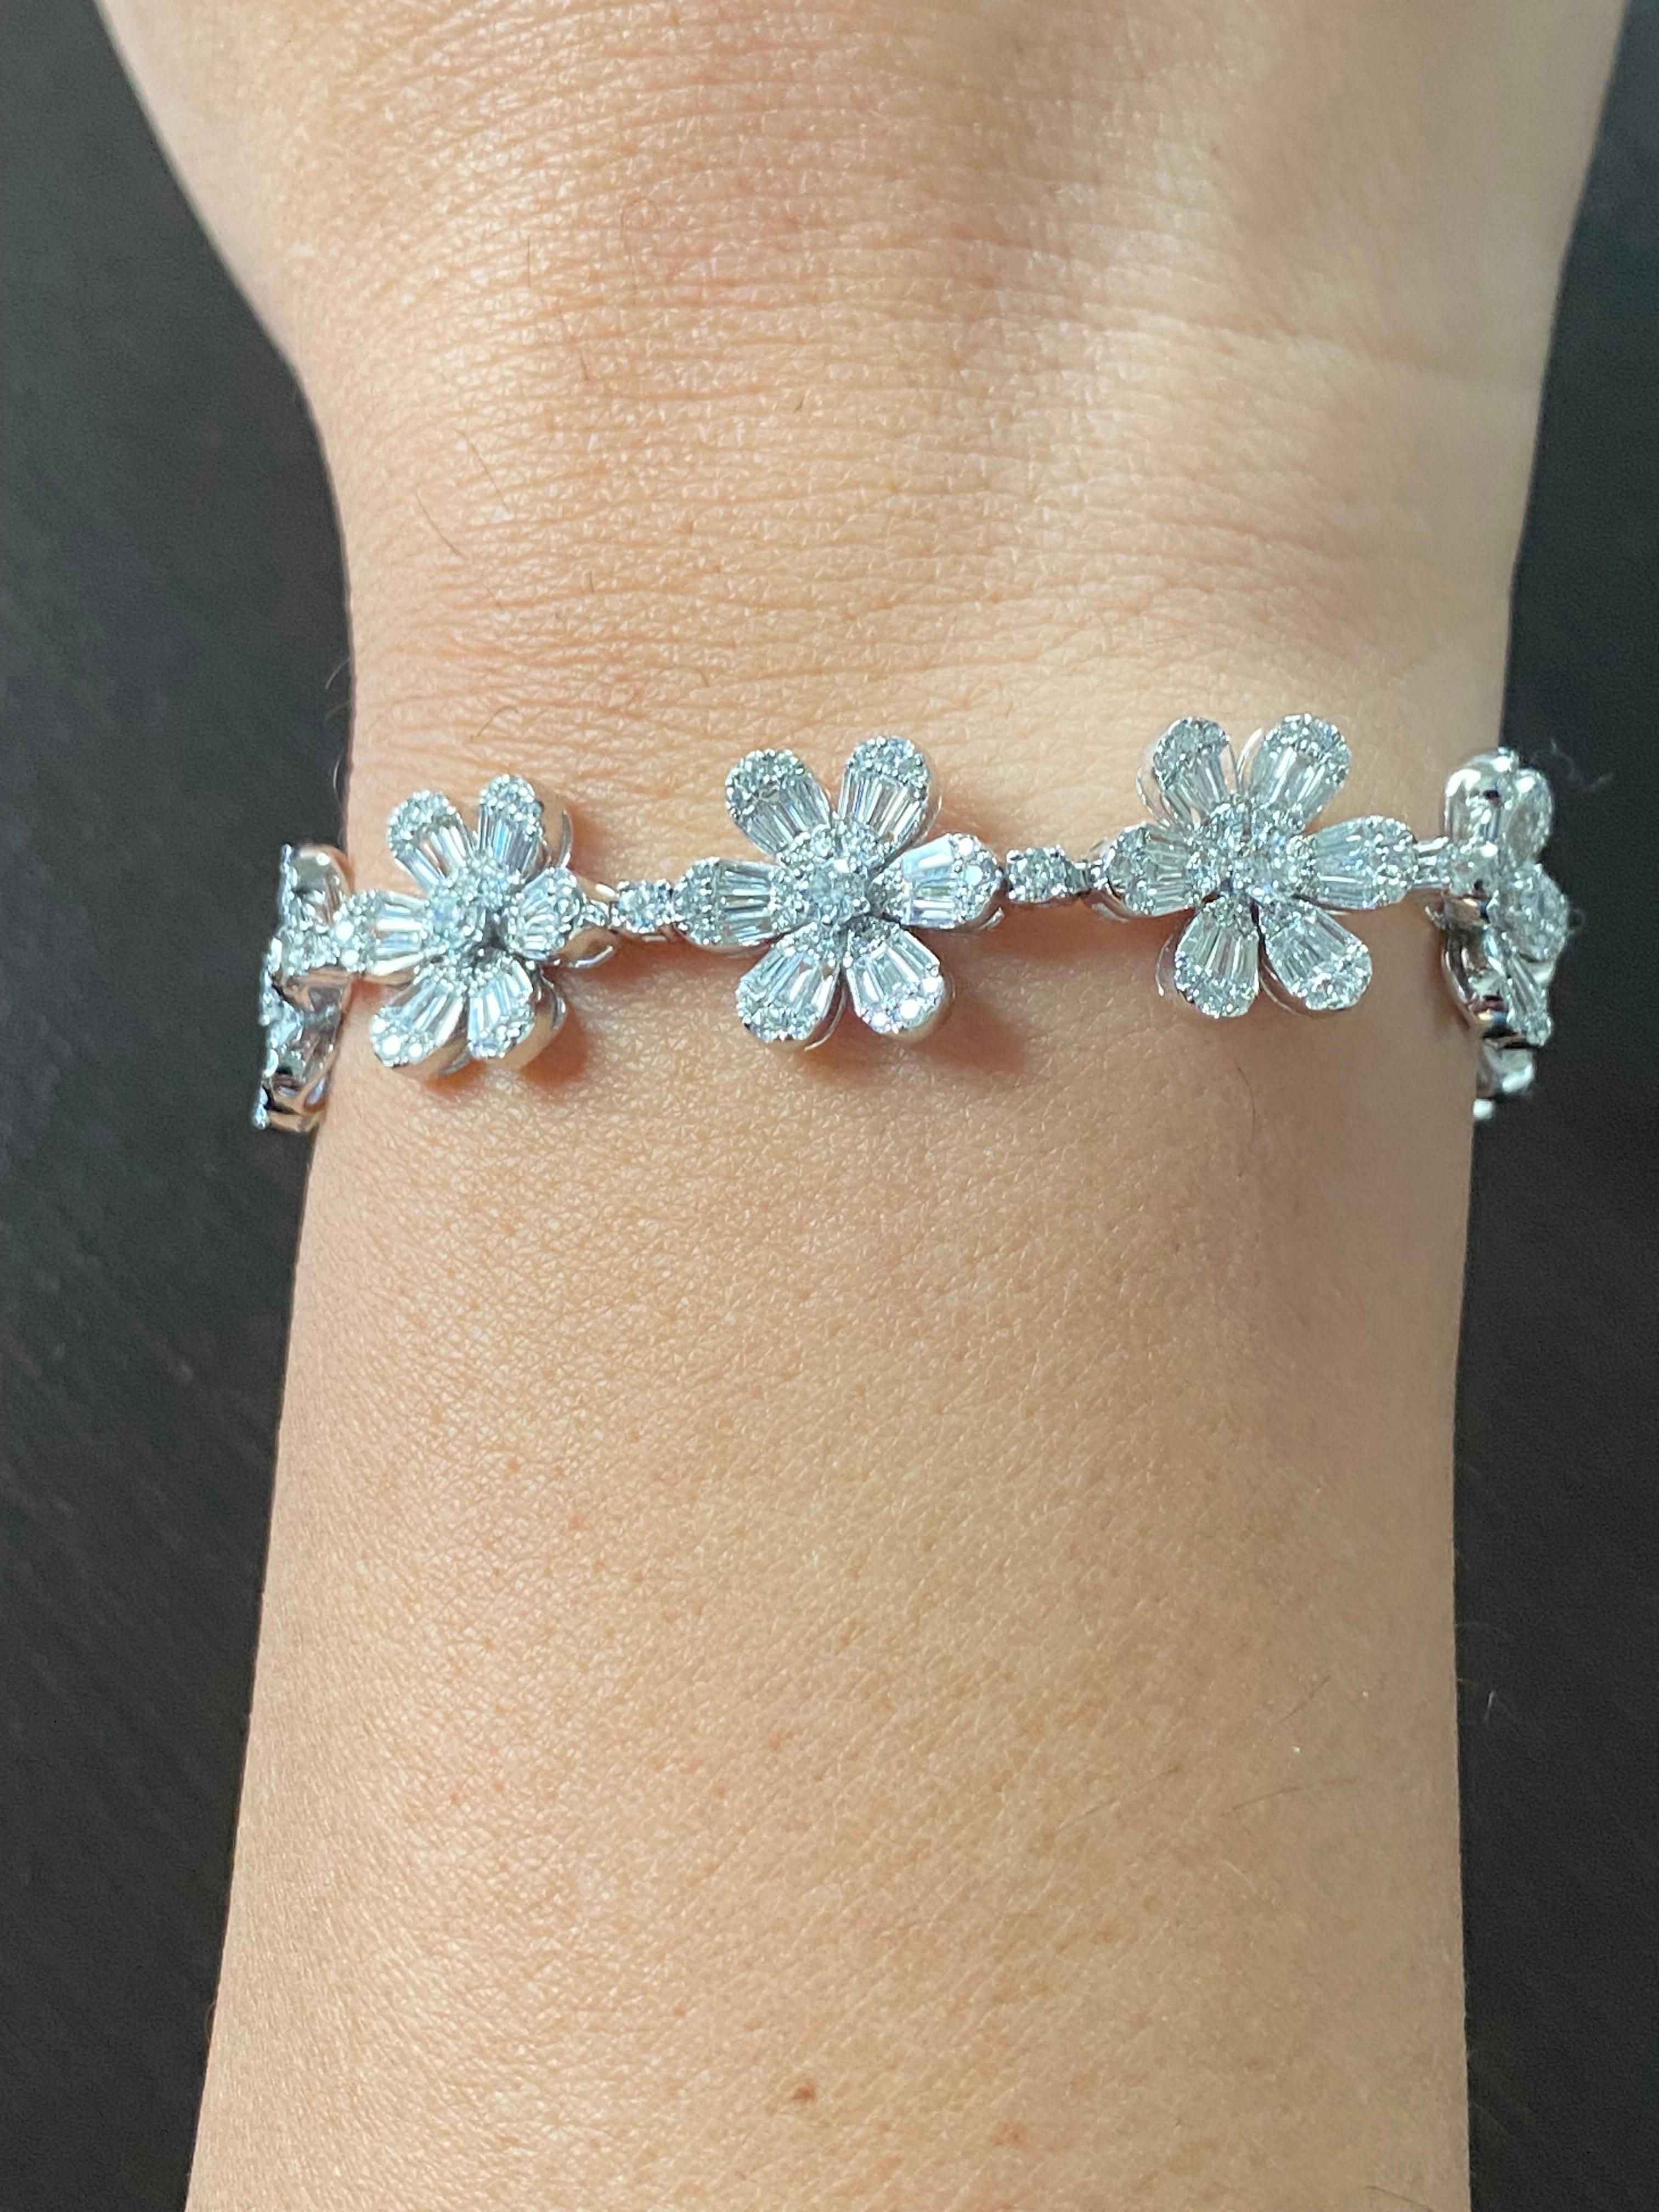 Flower daisy shaped bracelet set in 18K white gold. The bracelet is set with baguette and round diamonds. The total carat weight is 5.55. The color of the diamonds are F, the clarity is VS1.